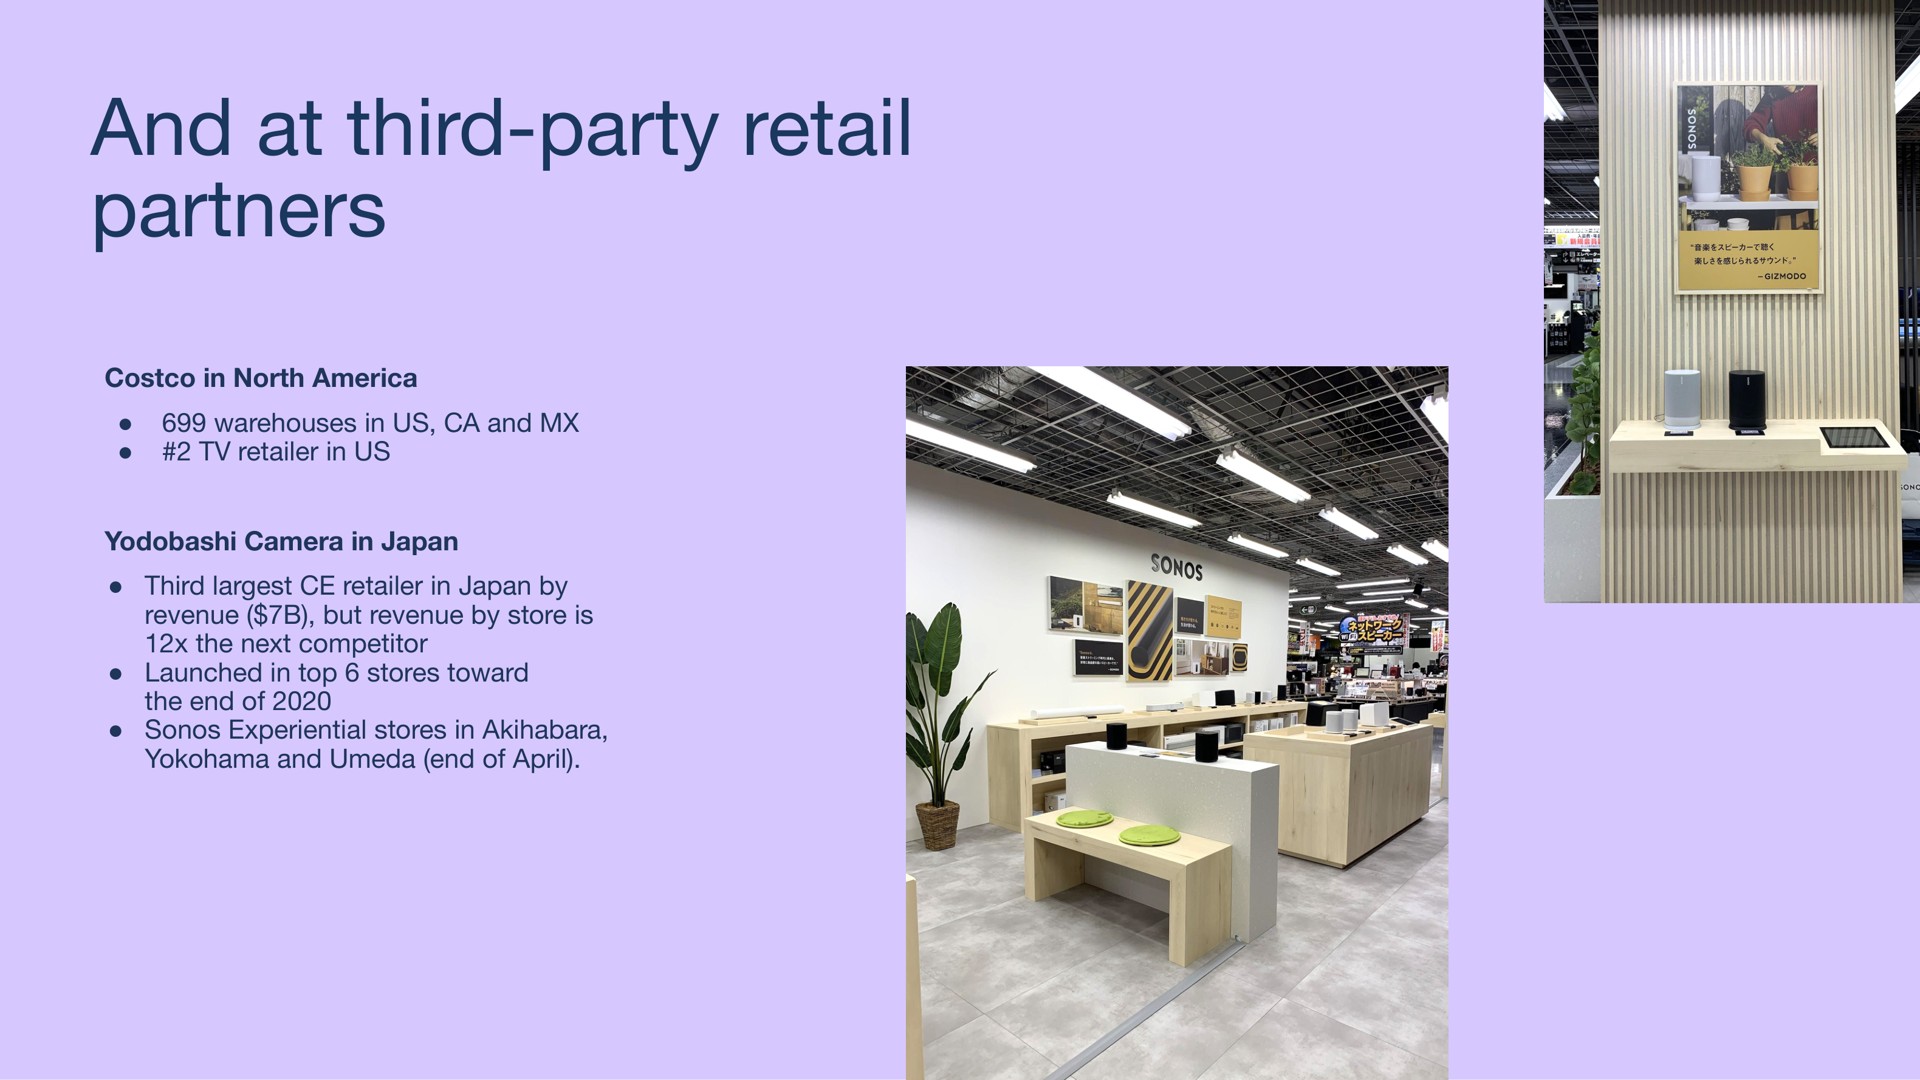 and at third party retail partners in north warehouses in us and retailer in us camera in japan third retailer in japan by revenue but revenue by store is the next competitor launched in top stores toward the end of experiential stores in and end of | Sonos